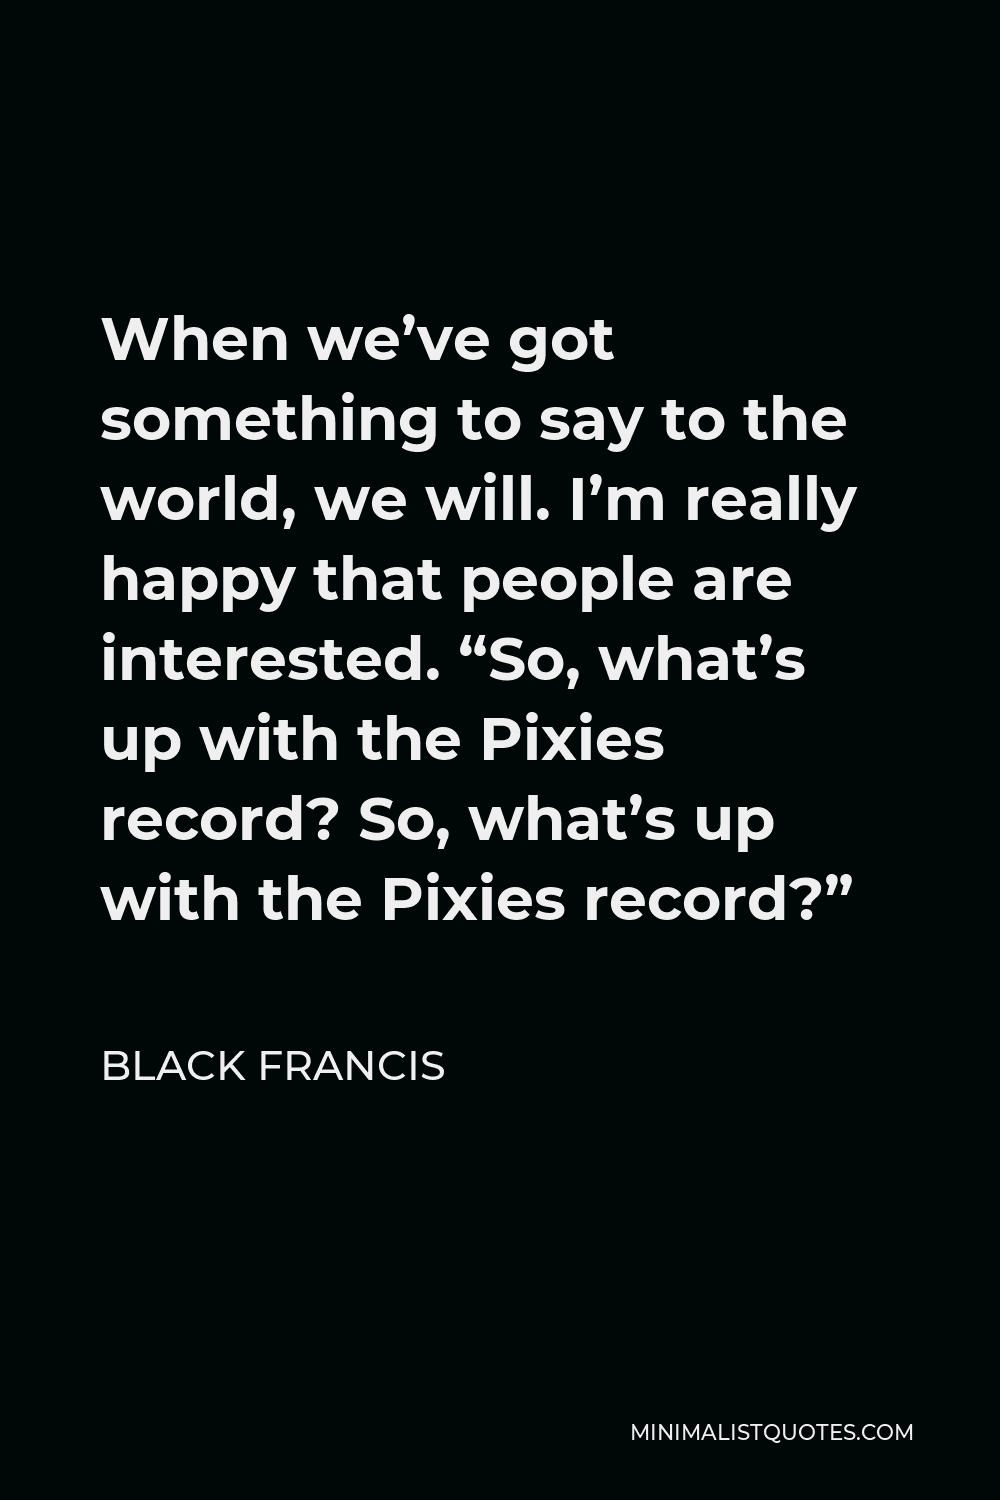 Black Francis Quote - When we’ve got something to say to the world, we will. I’m really happy that people are interested. “So, what’s up with the Pixies record? So, what’s up with the Pixies record?”